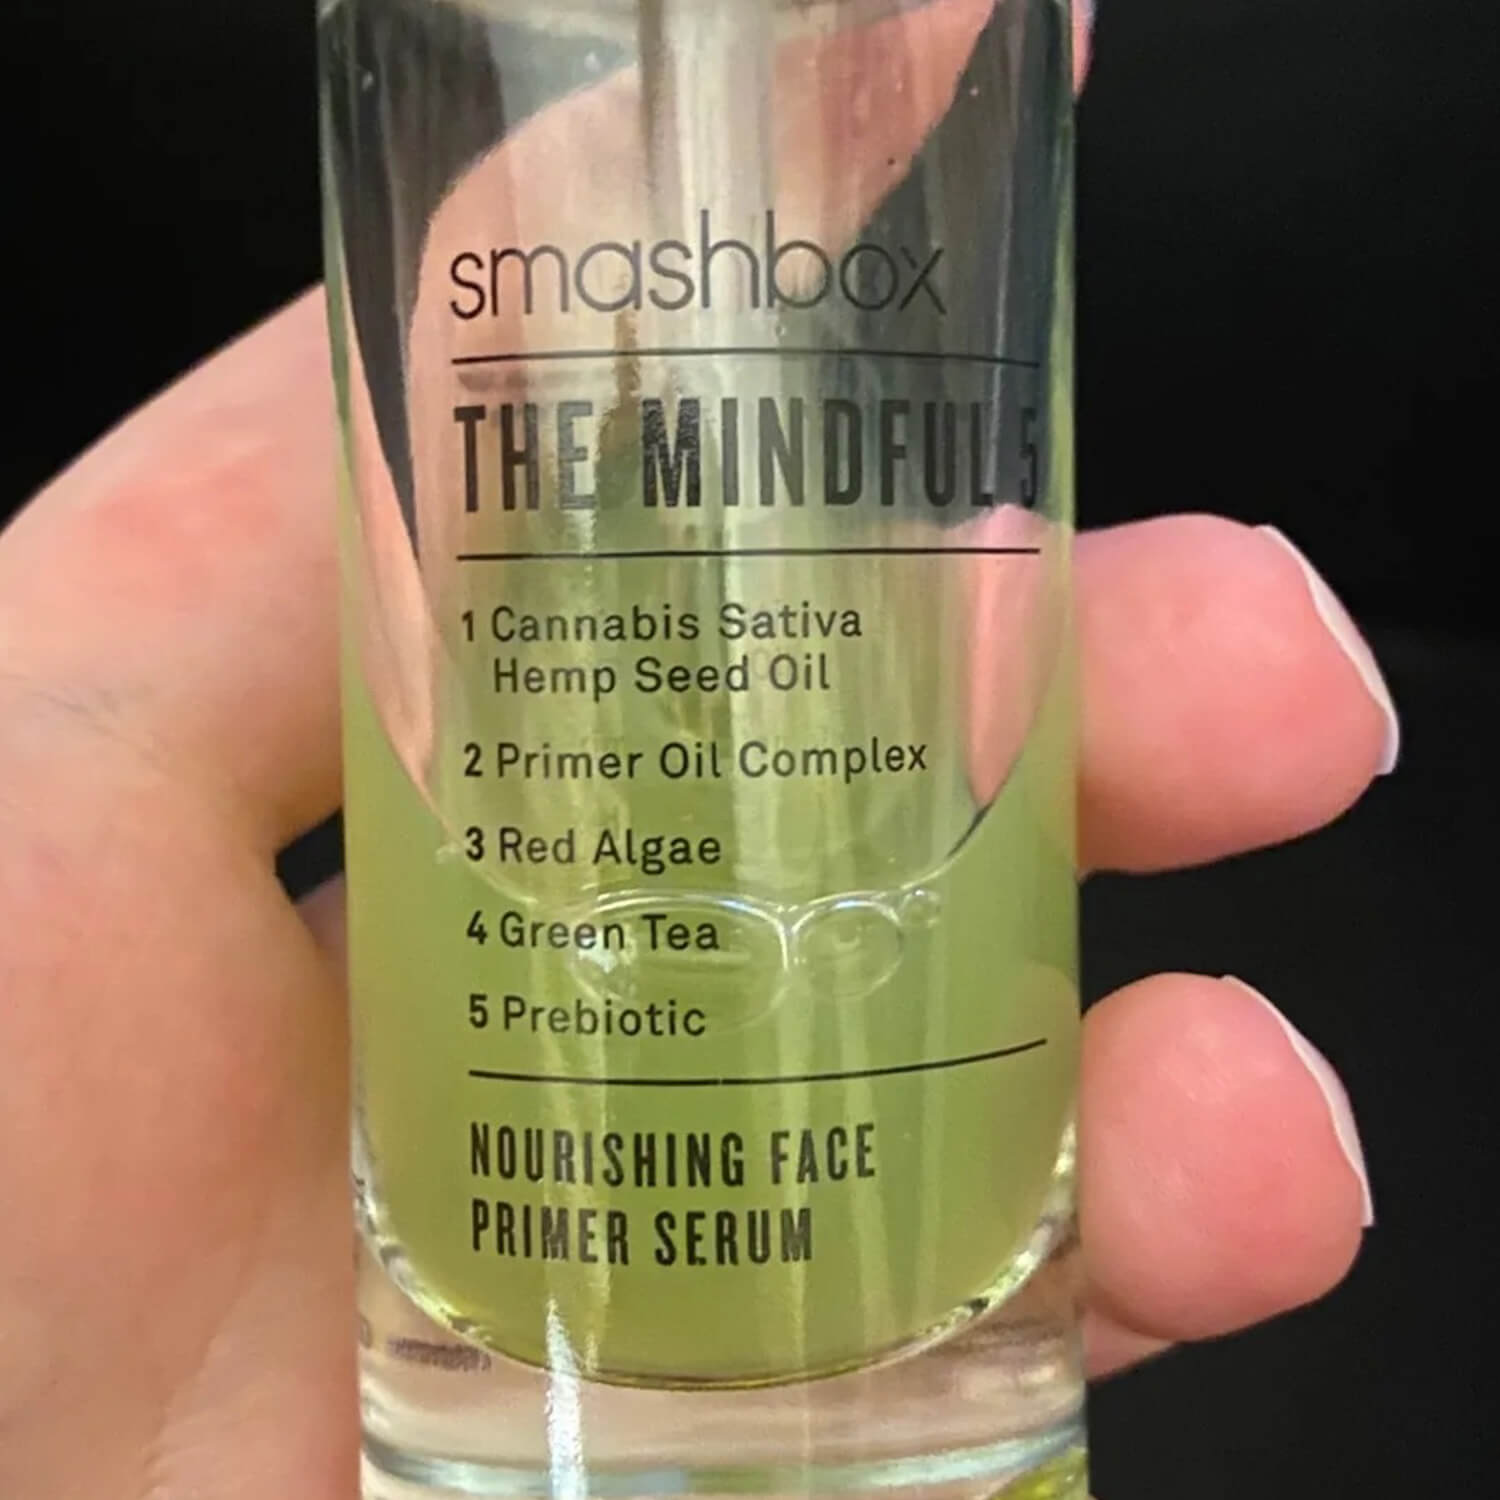 image showing smashbox face primer for skin glow and brightness available for delivery in Pakistan